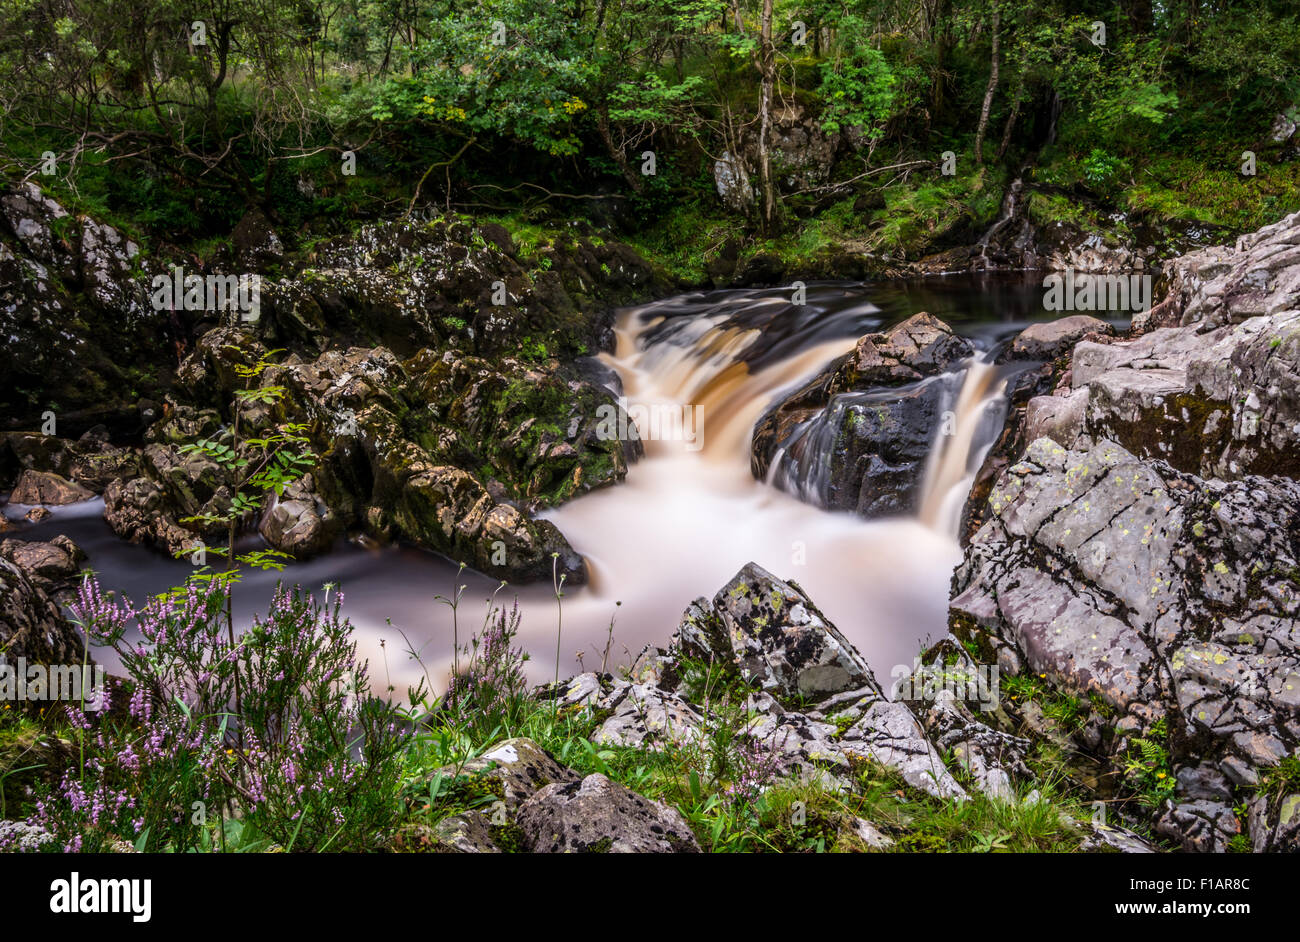 Glentrool waterfall and vegetation contrasting against the granite rocks. Stock Photo